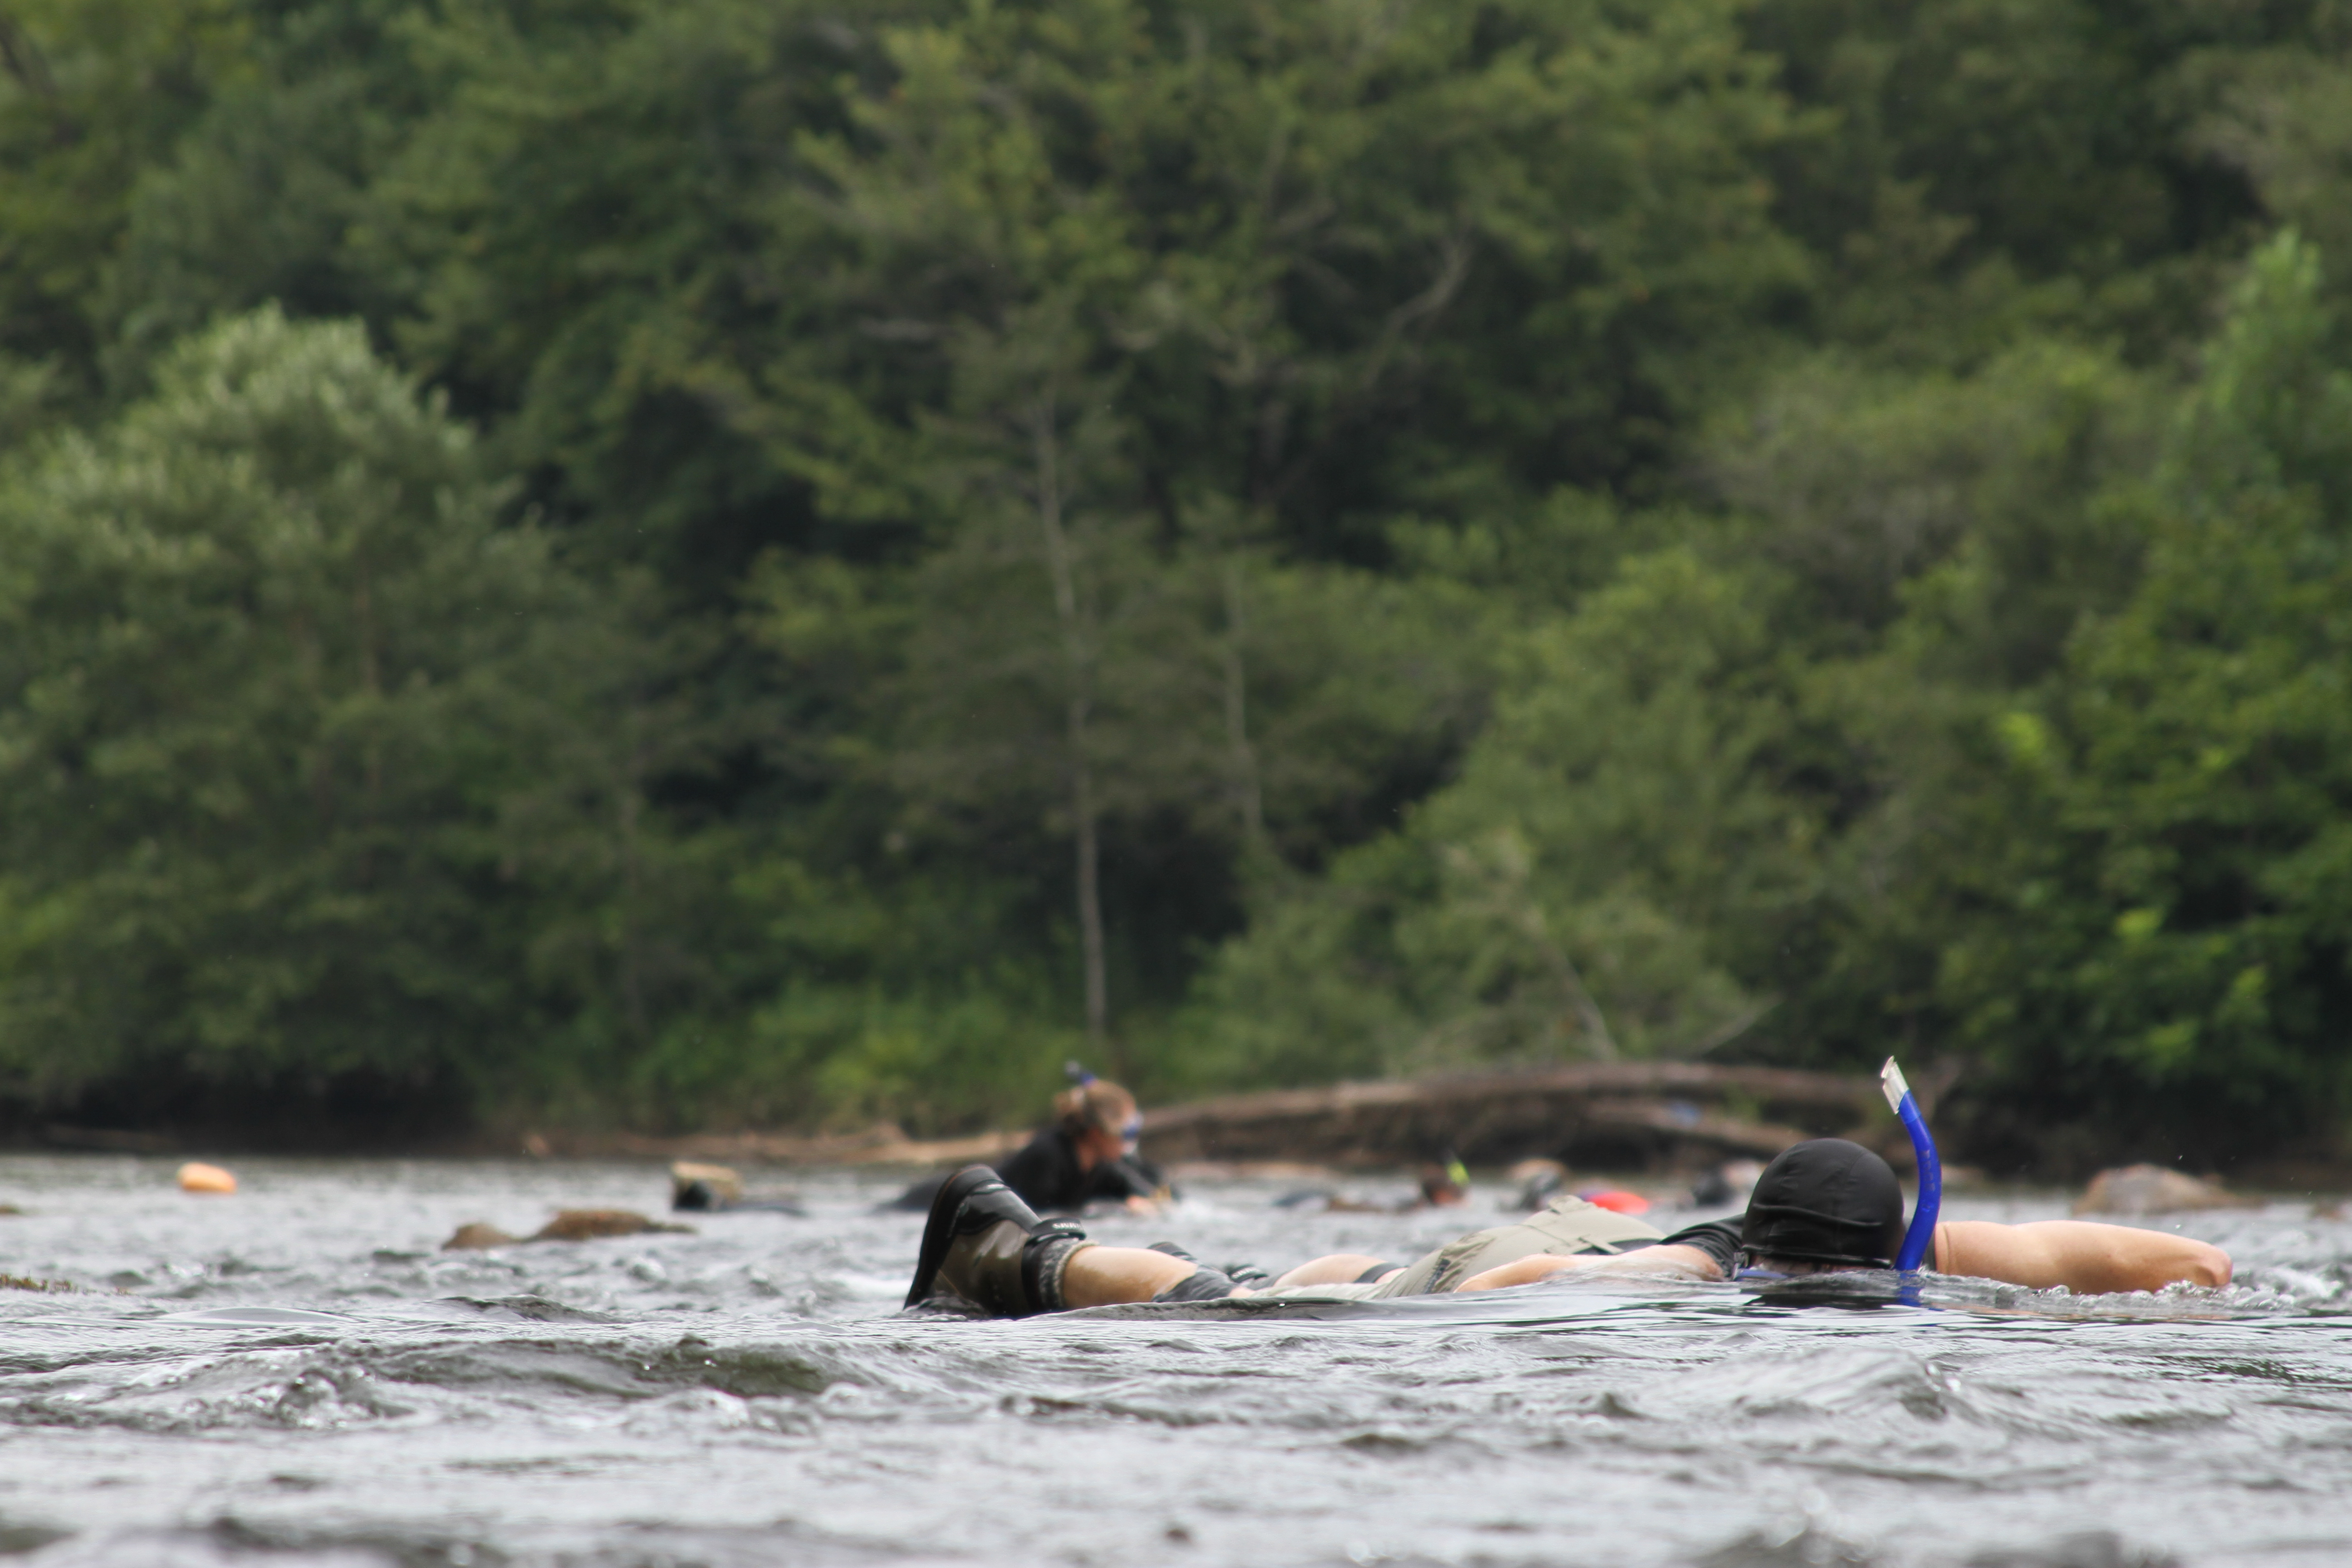 Biologists snorkeling in a shallow stretch of river with trees in the background